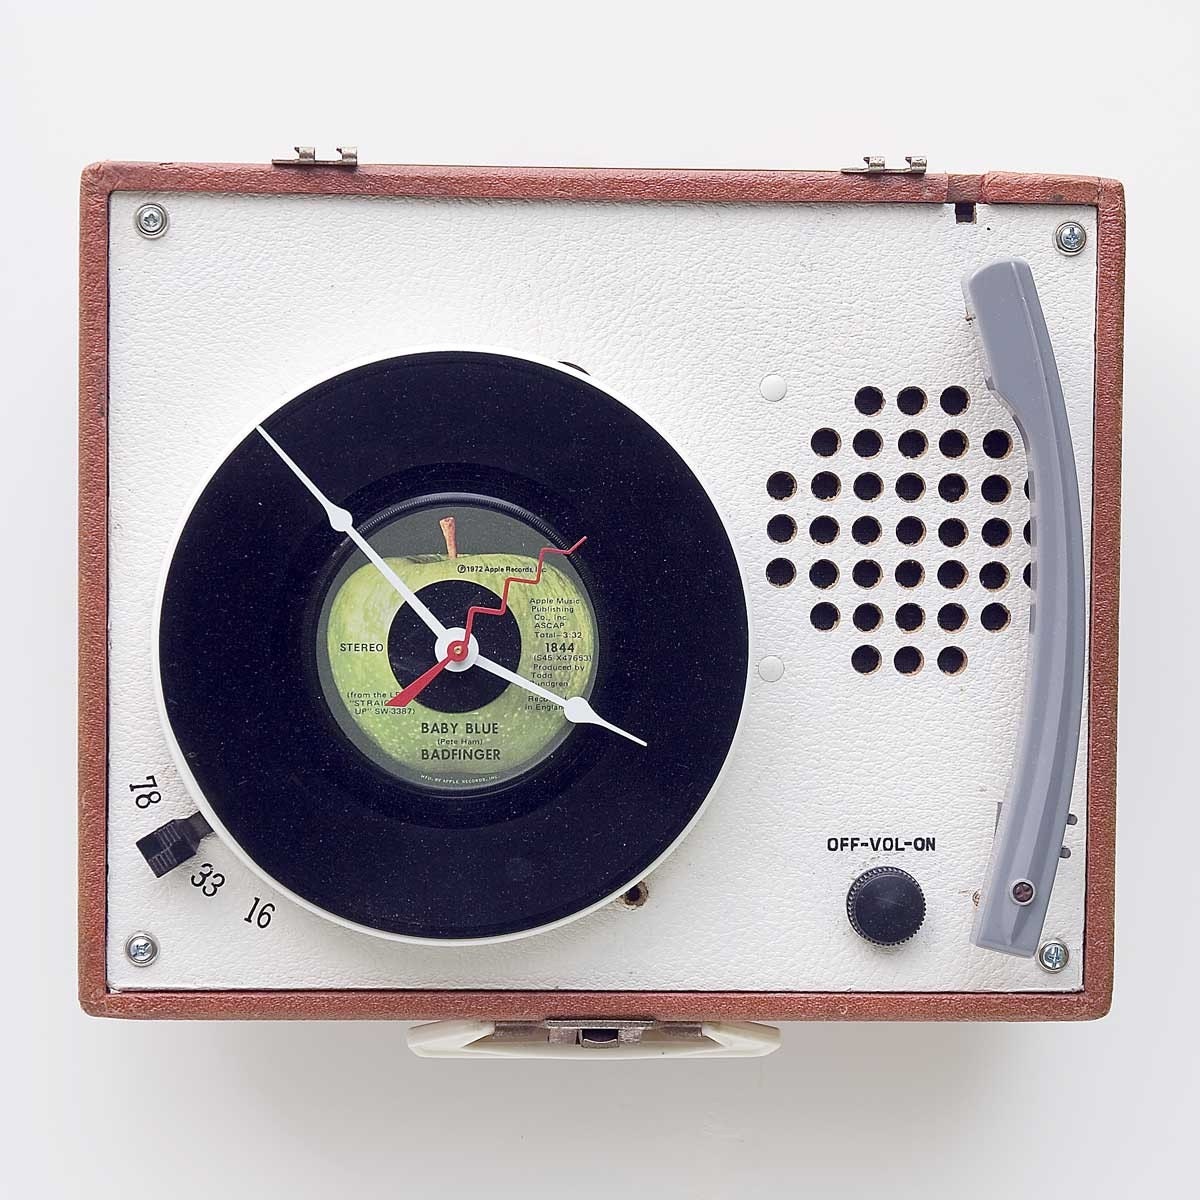 Clock made from a recycled record player